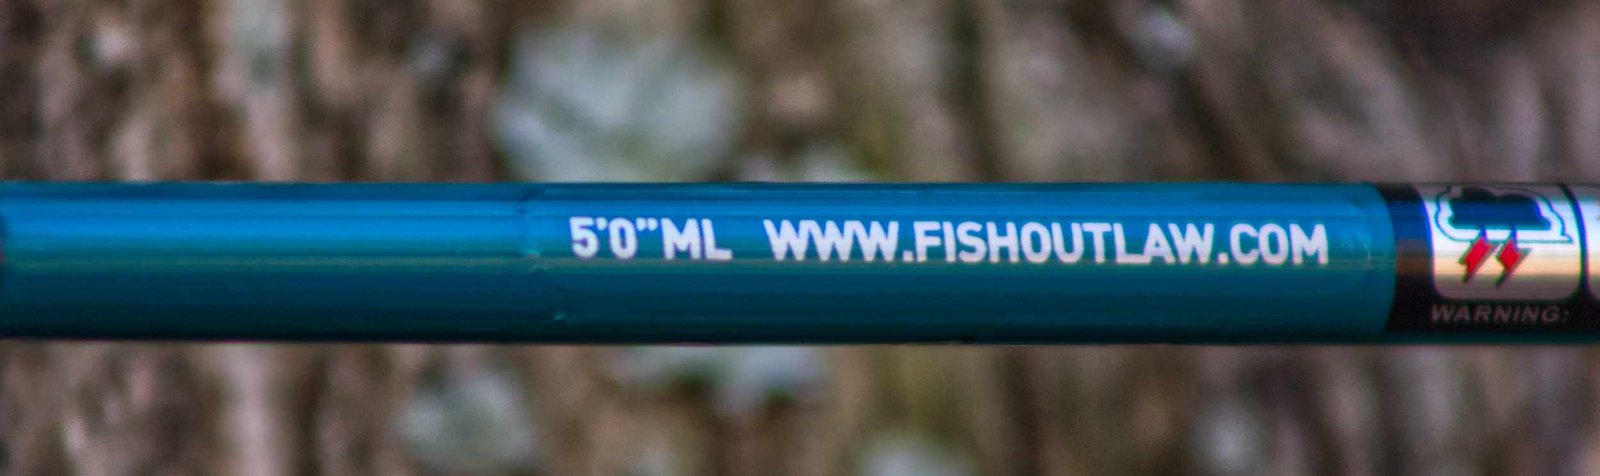 24T Outlaw 5.0 - 1 Piece Spinning Rod - Outlaw Crappie Poles